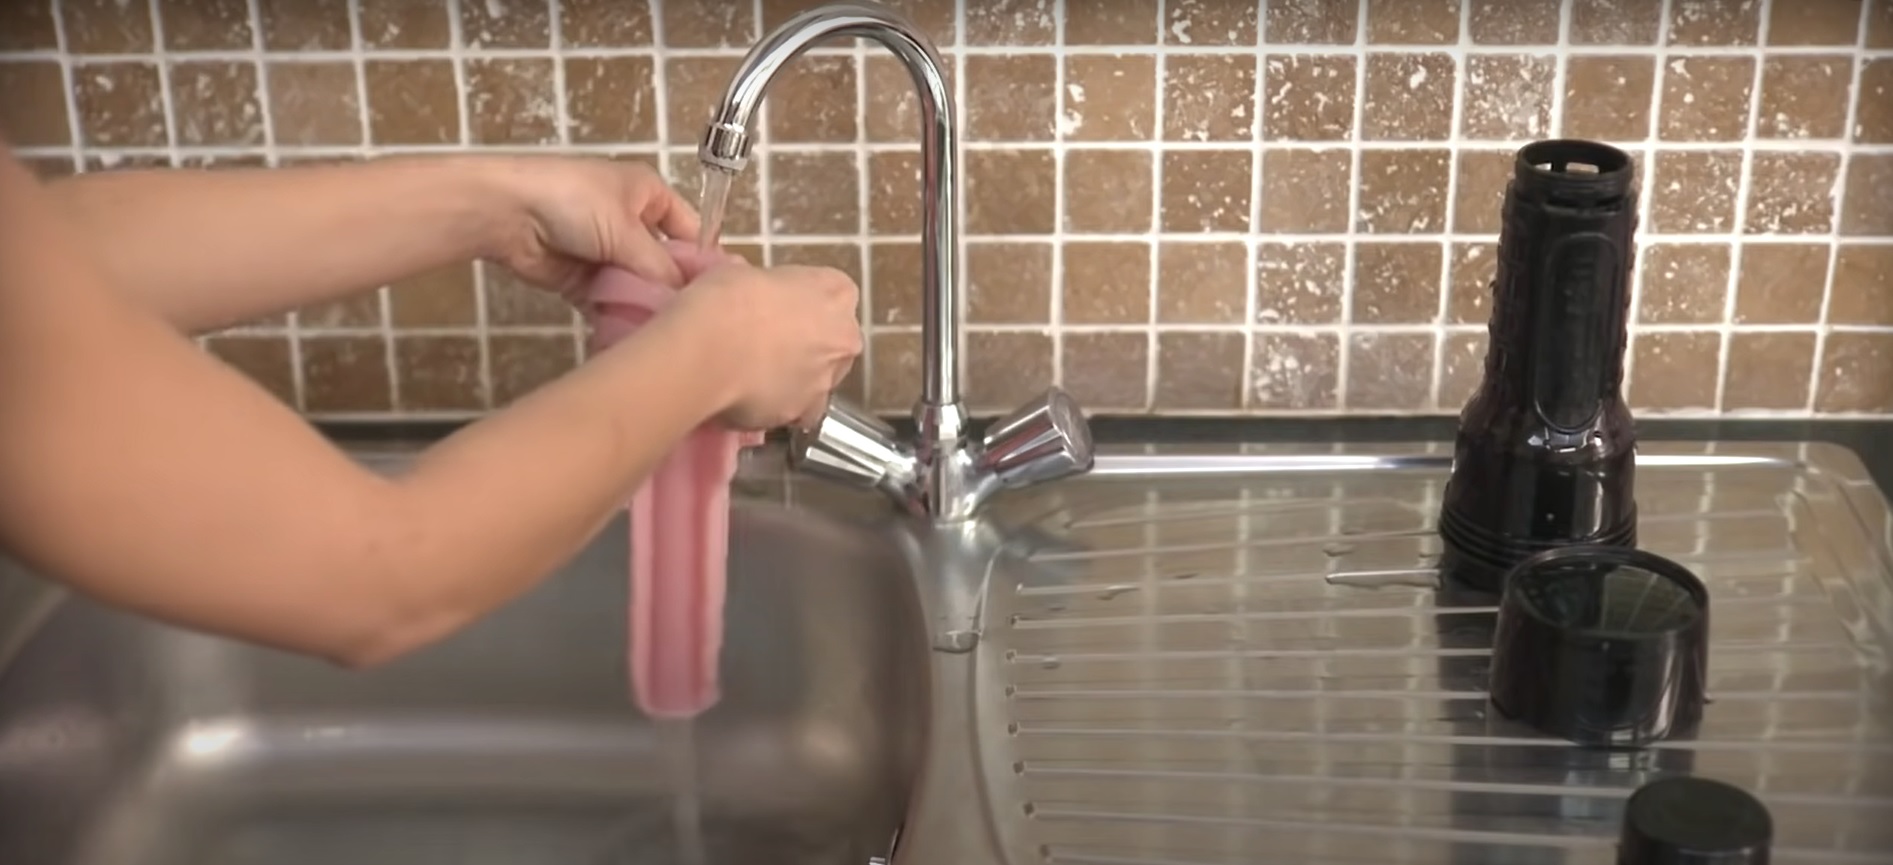 2. rinse sleeve thoroughly under tap no soap